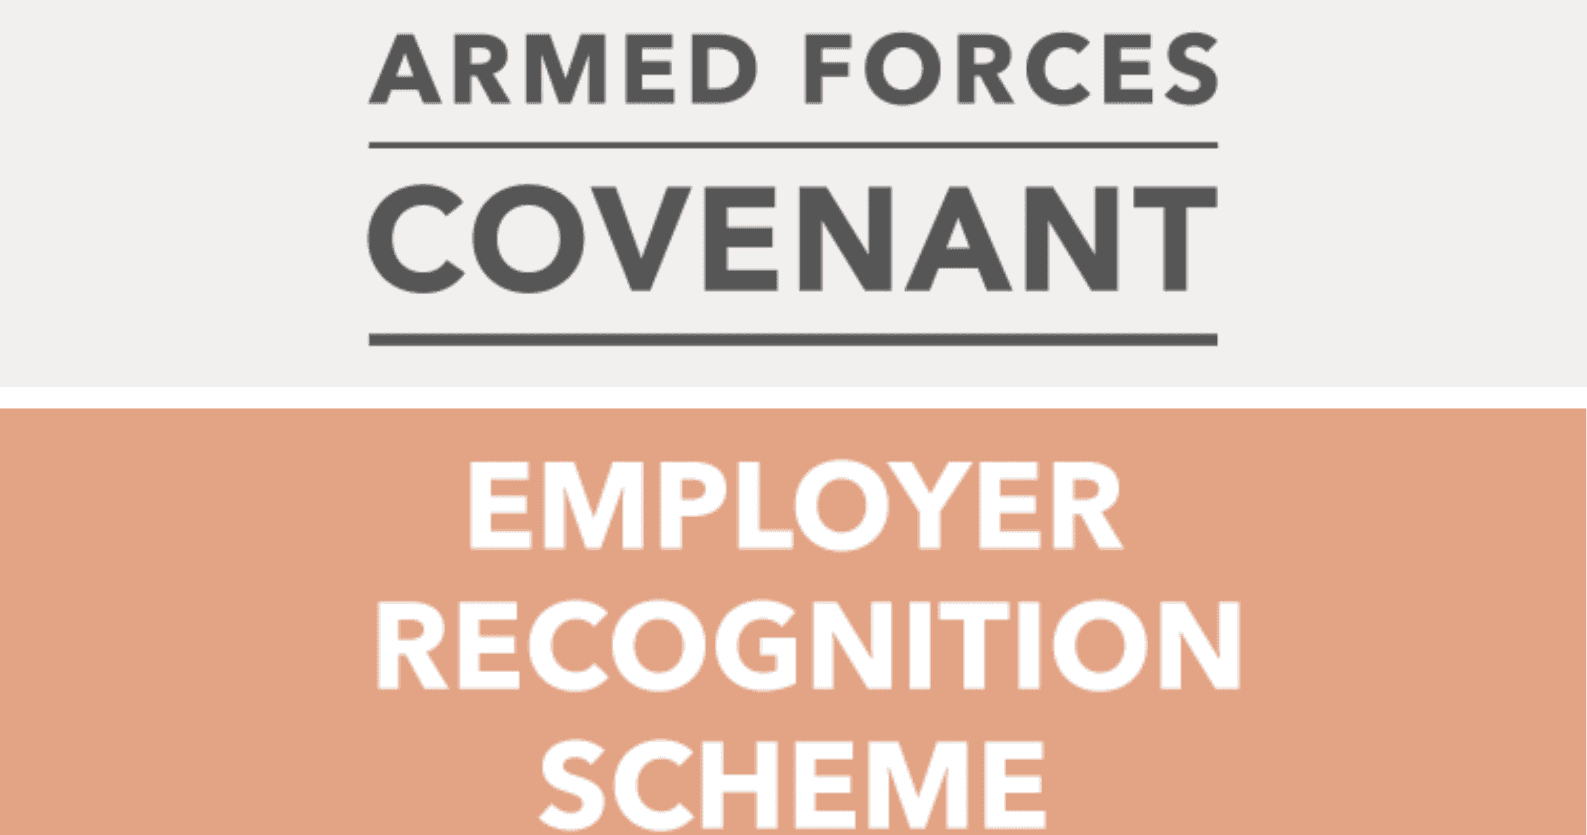 Armed Forces Covenant Bronze Award Aspect Ratio 760 400